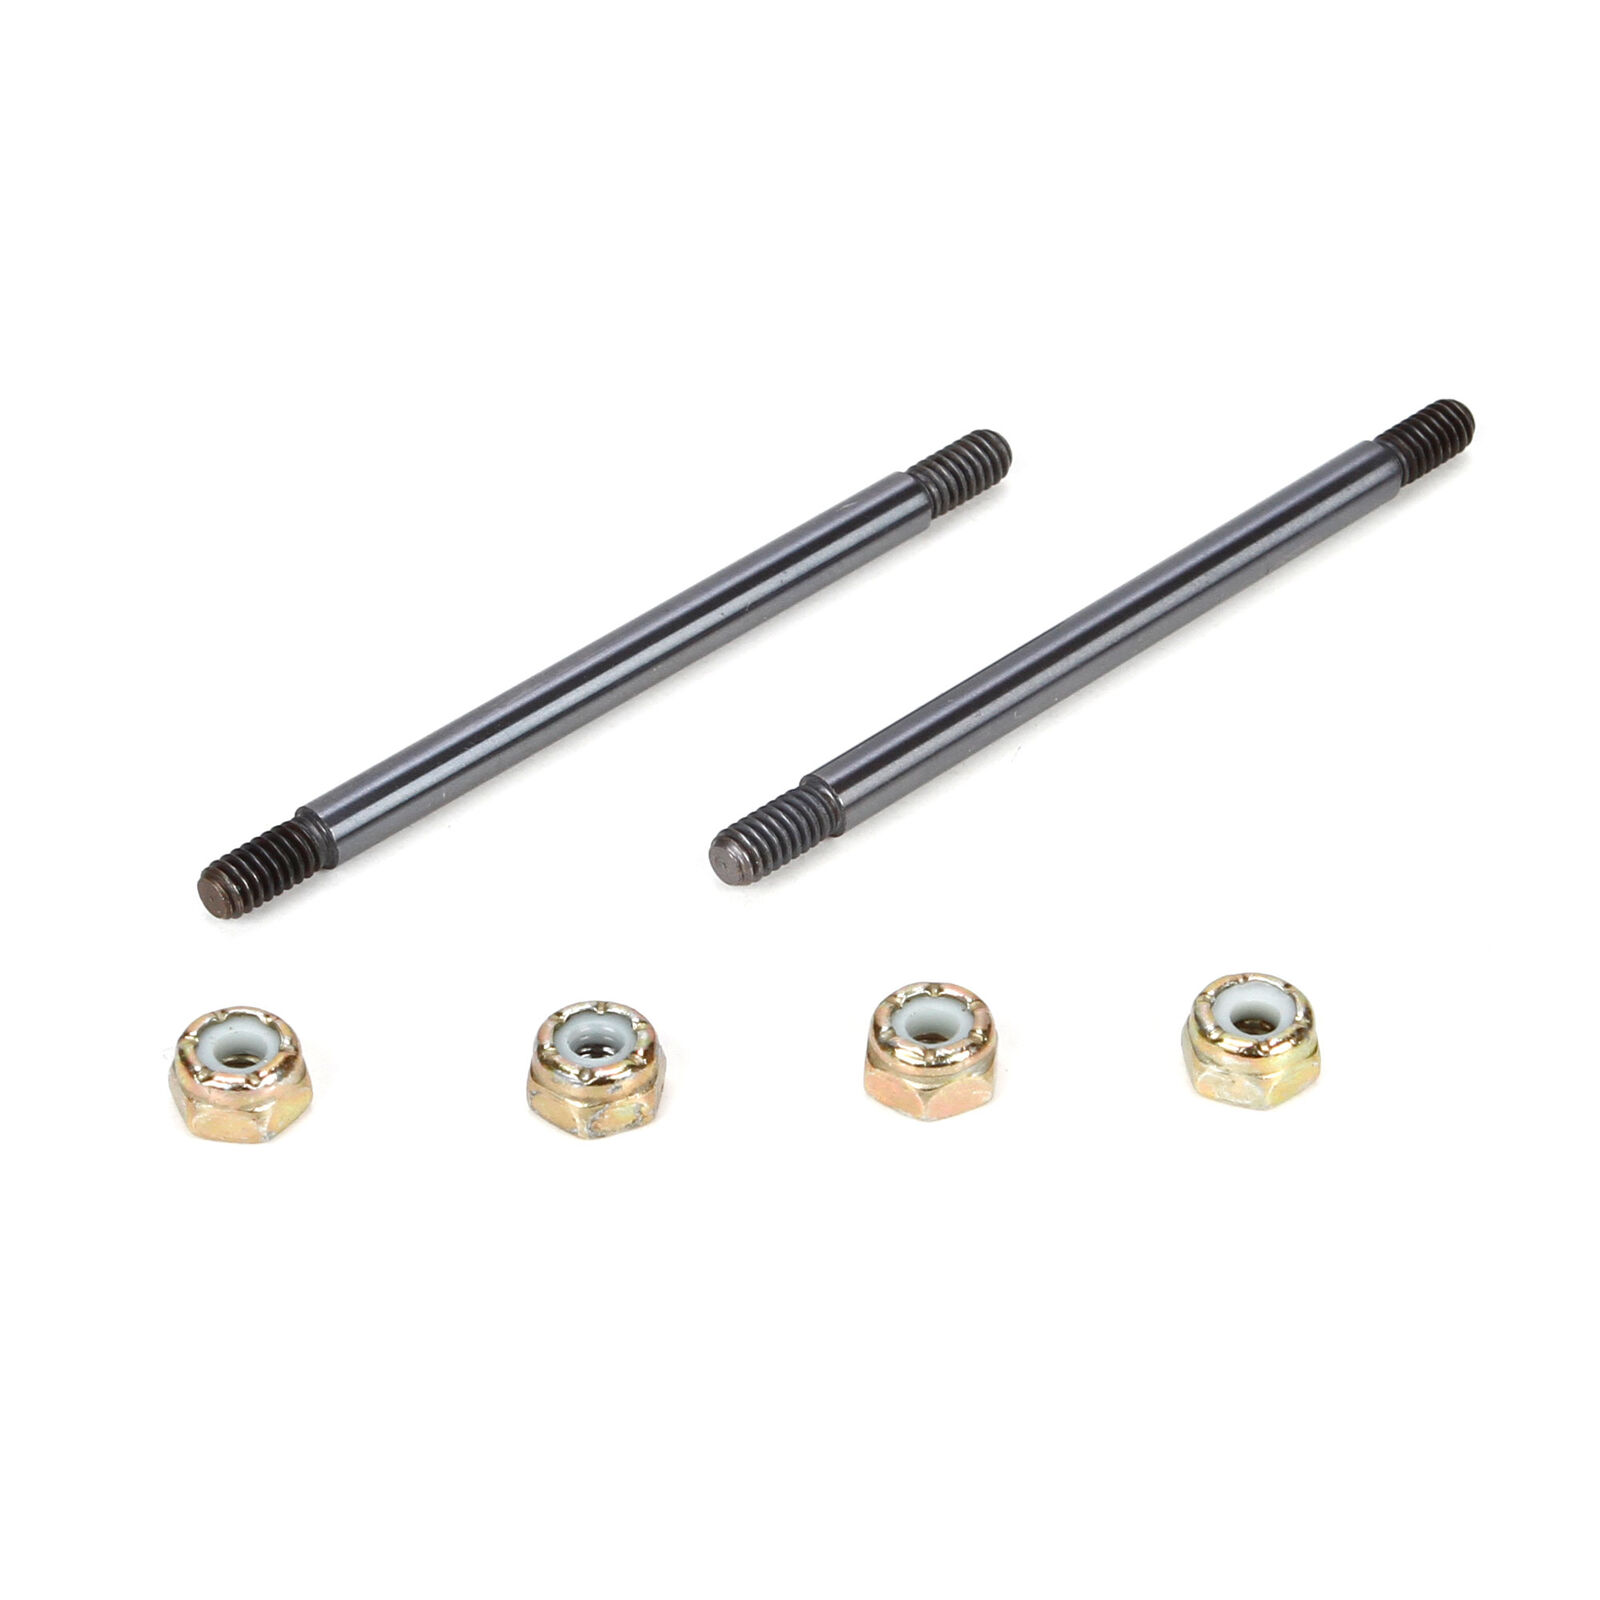 Outer Hinge Pins, 3.5mm (2): 8B 3.0